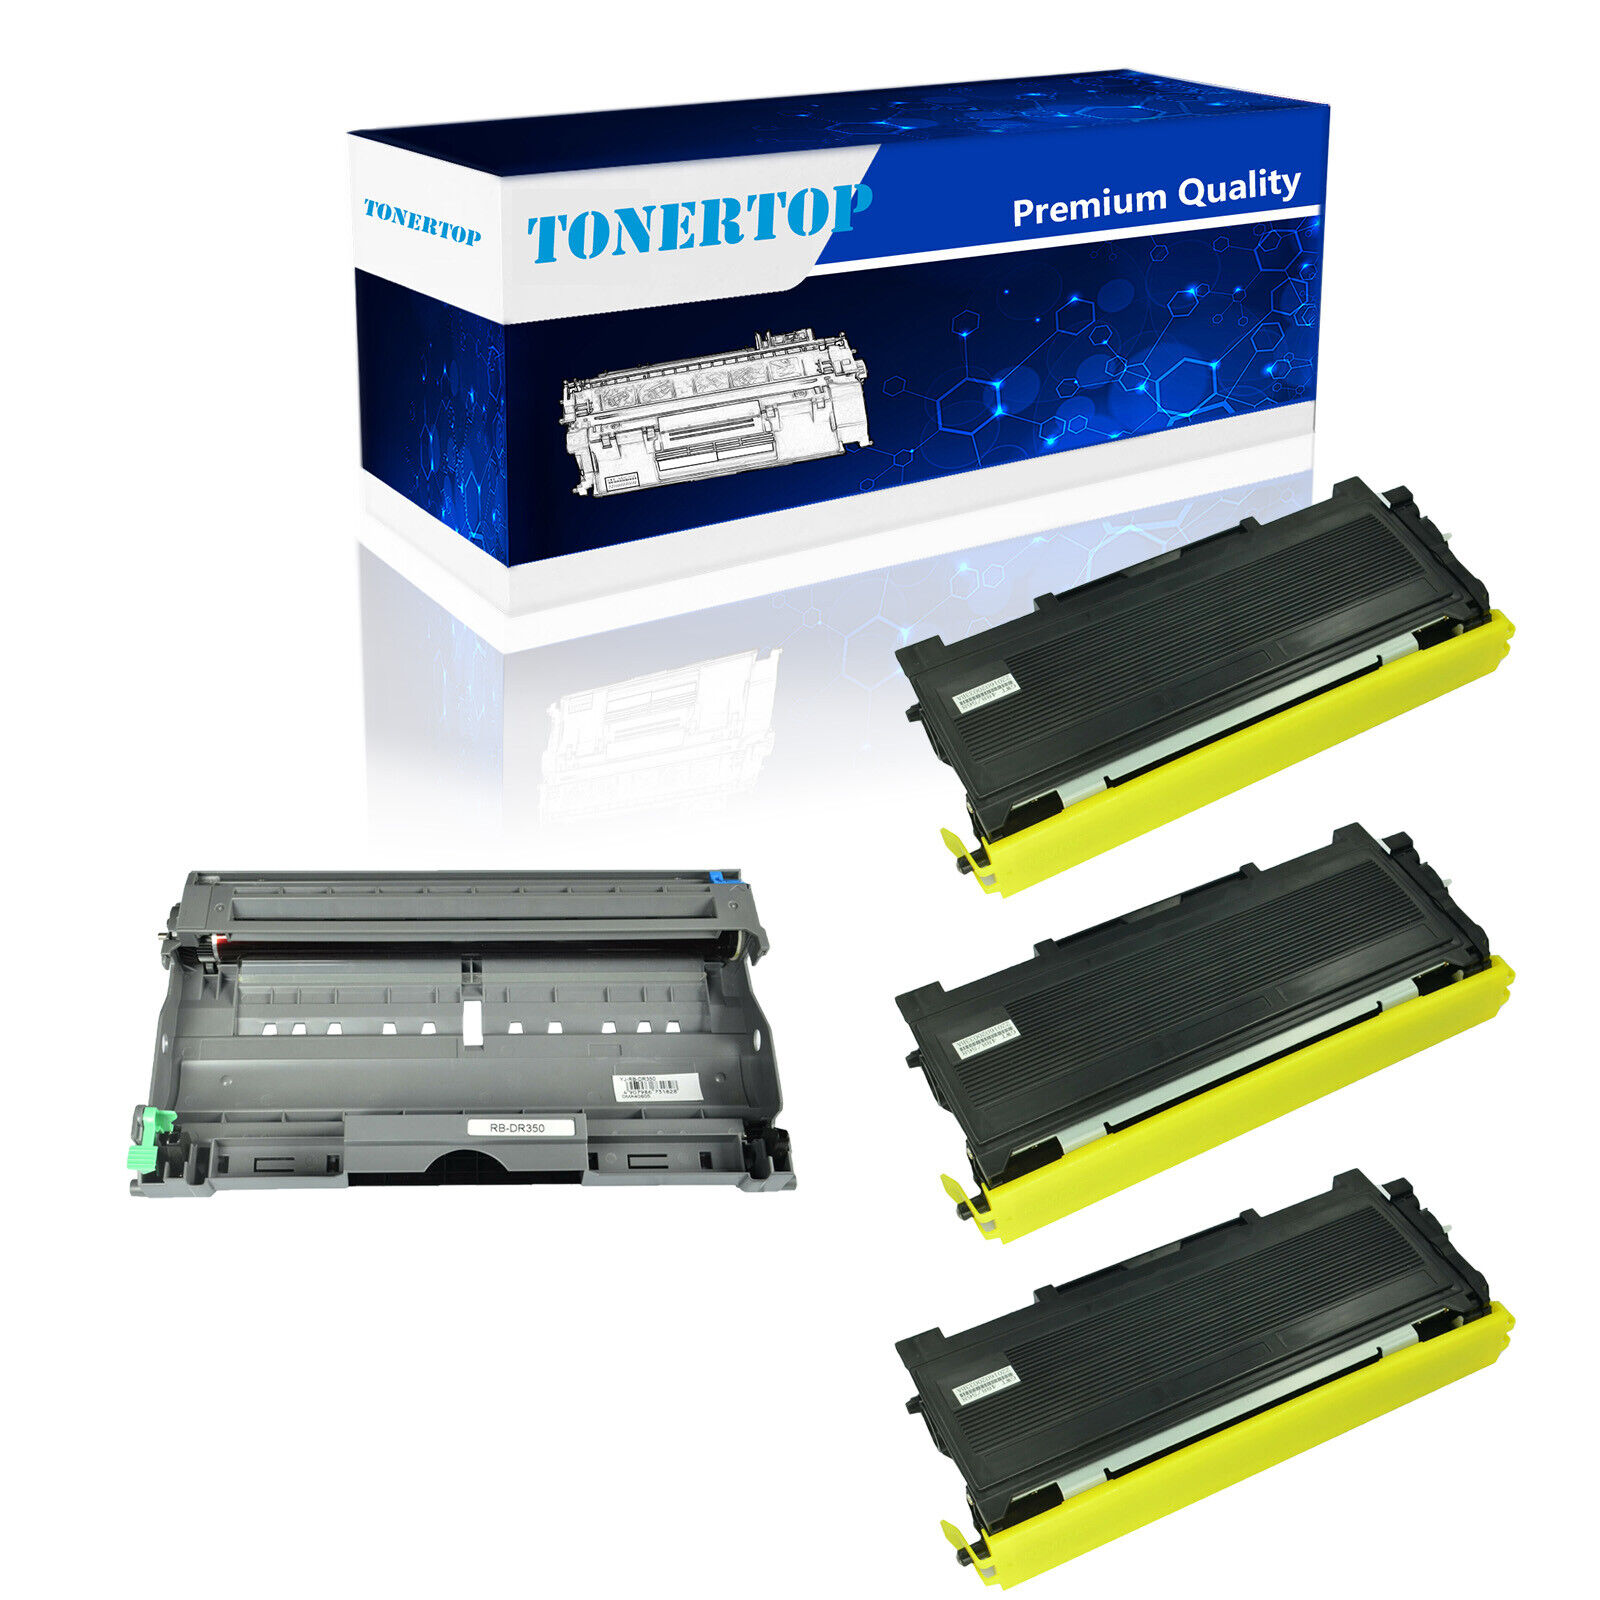 3PK TN350 Toner & 1PK DR350 Drum For Brother HL-2075N 2070NR DCP-7010 DCP-7020 